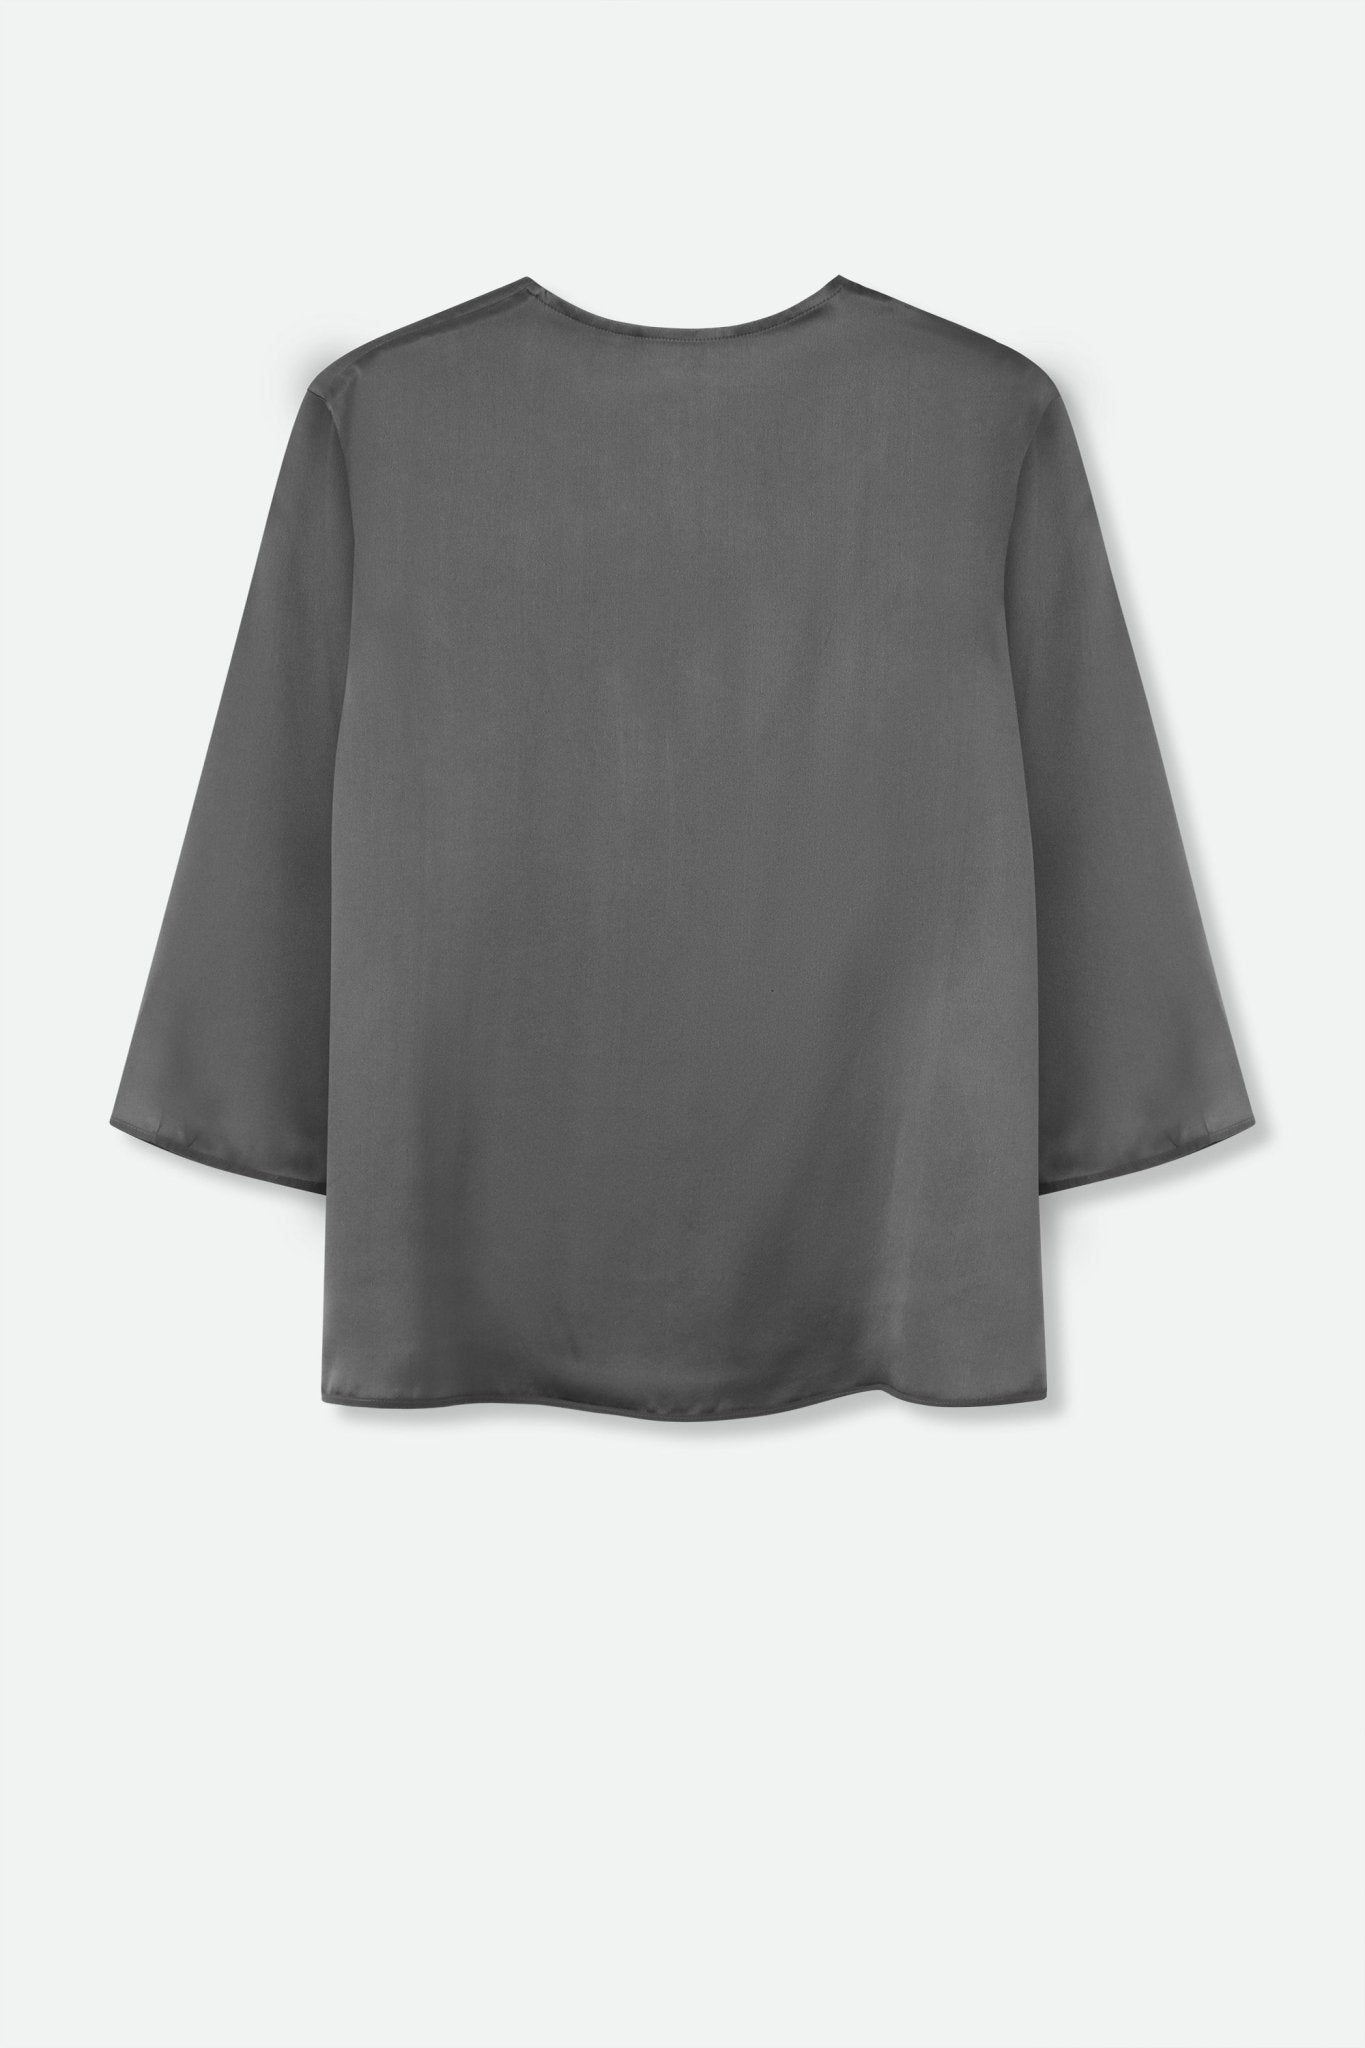 FIORA FRONT SEAM SHIRT IN SILK SATIN CHARCOAL SILVER - Jarbo